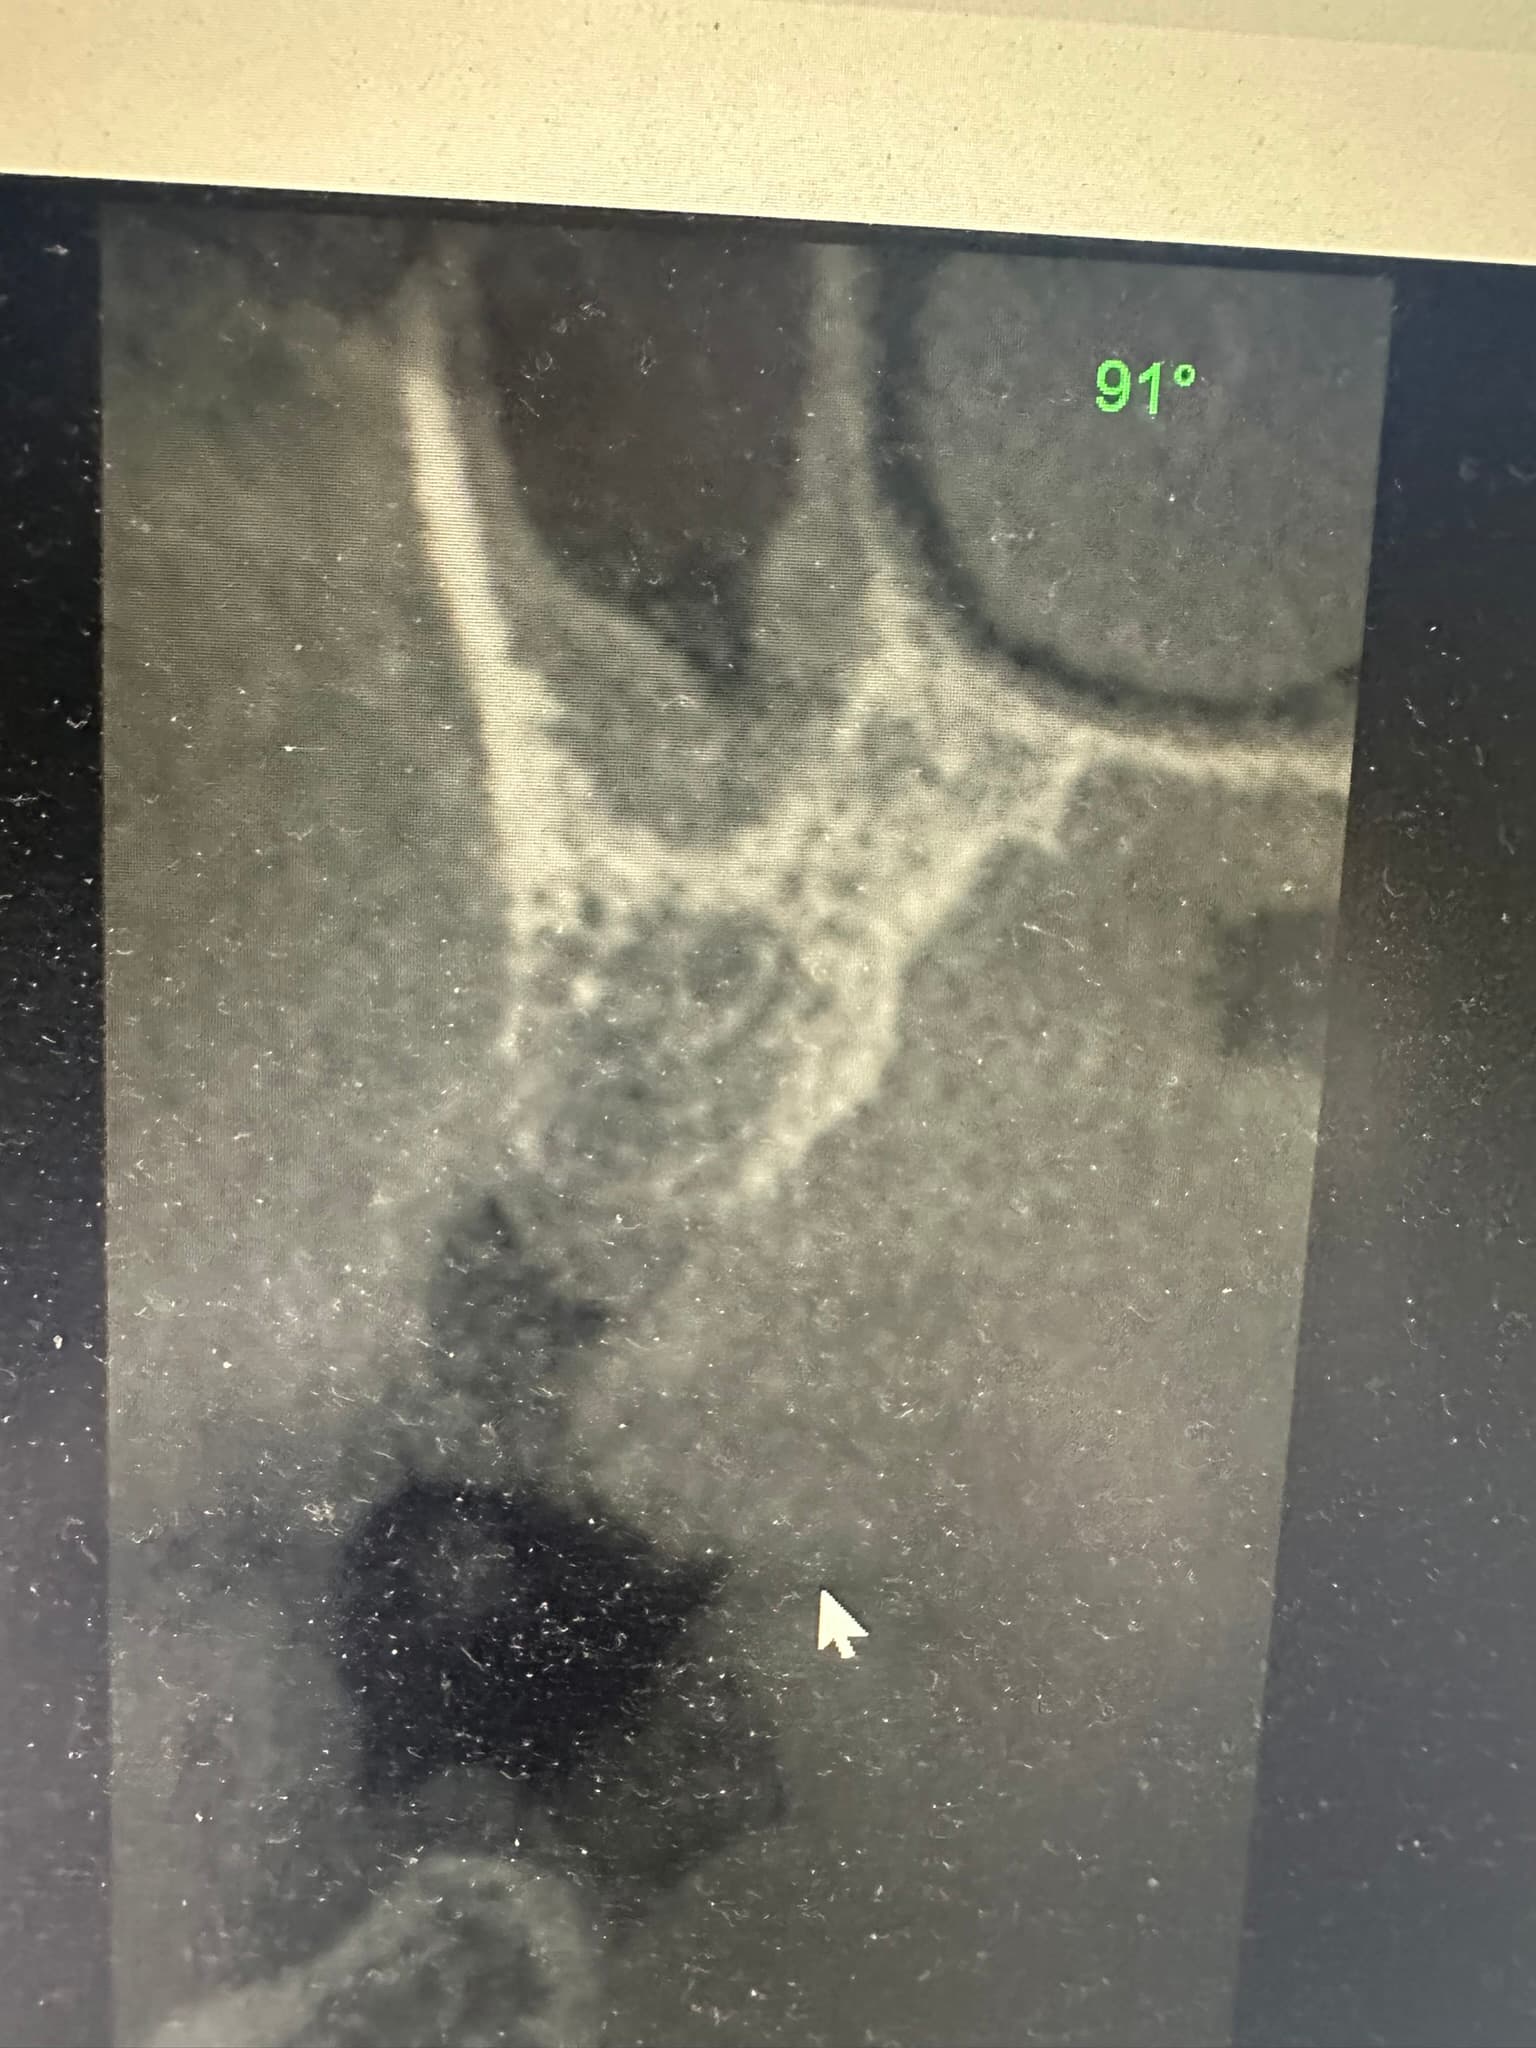 Would you preform a sinus lift if the thickening of sinus membrane is as shown in this case?